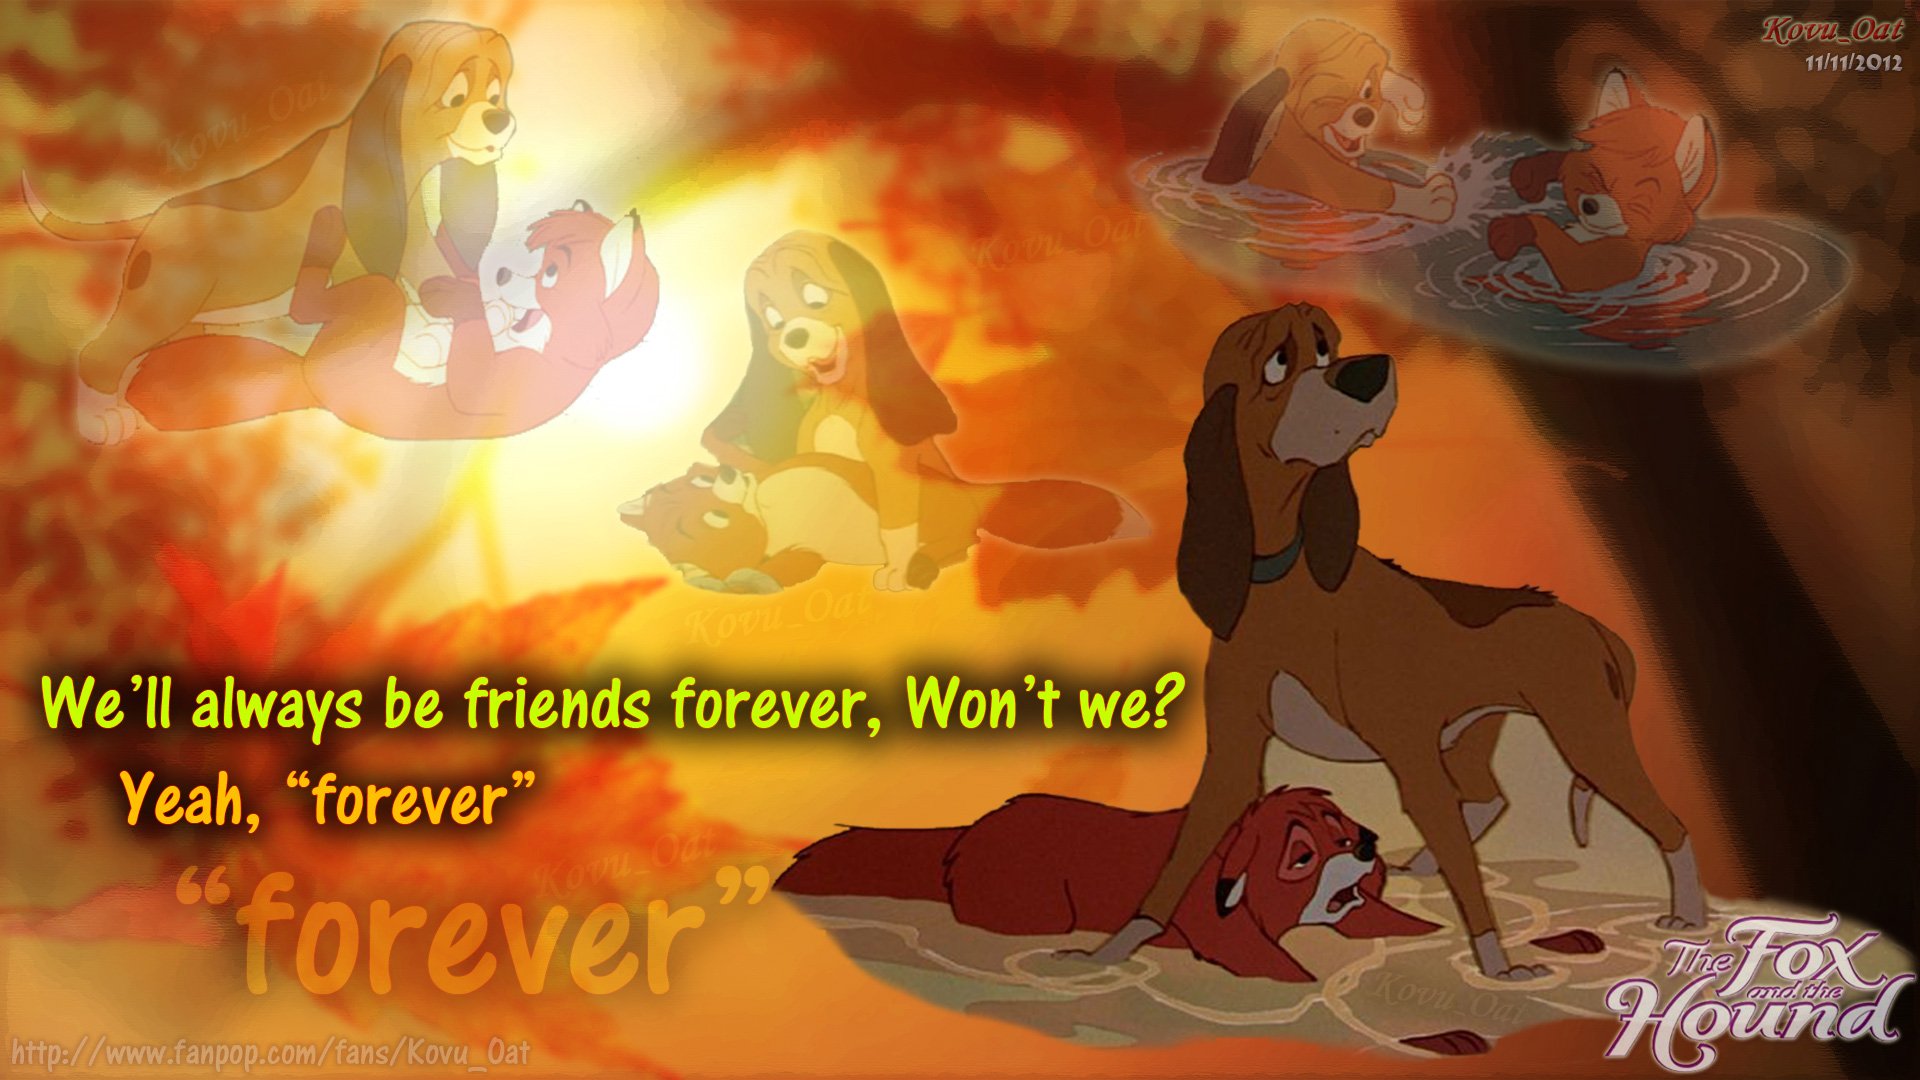  wallpaper HD   The Fox and the Hound Wallpaper 32726676